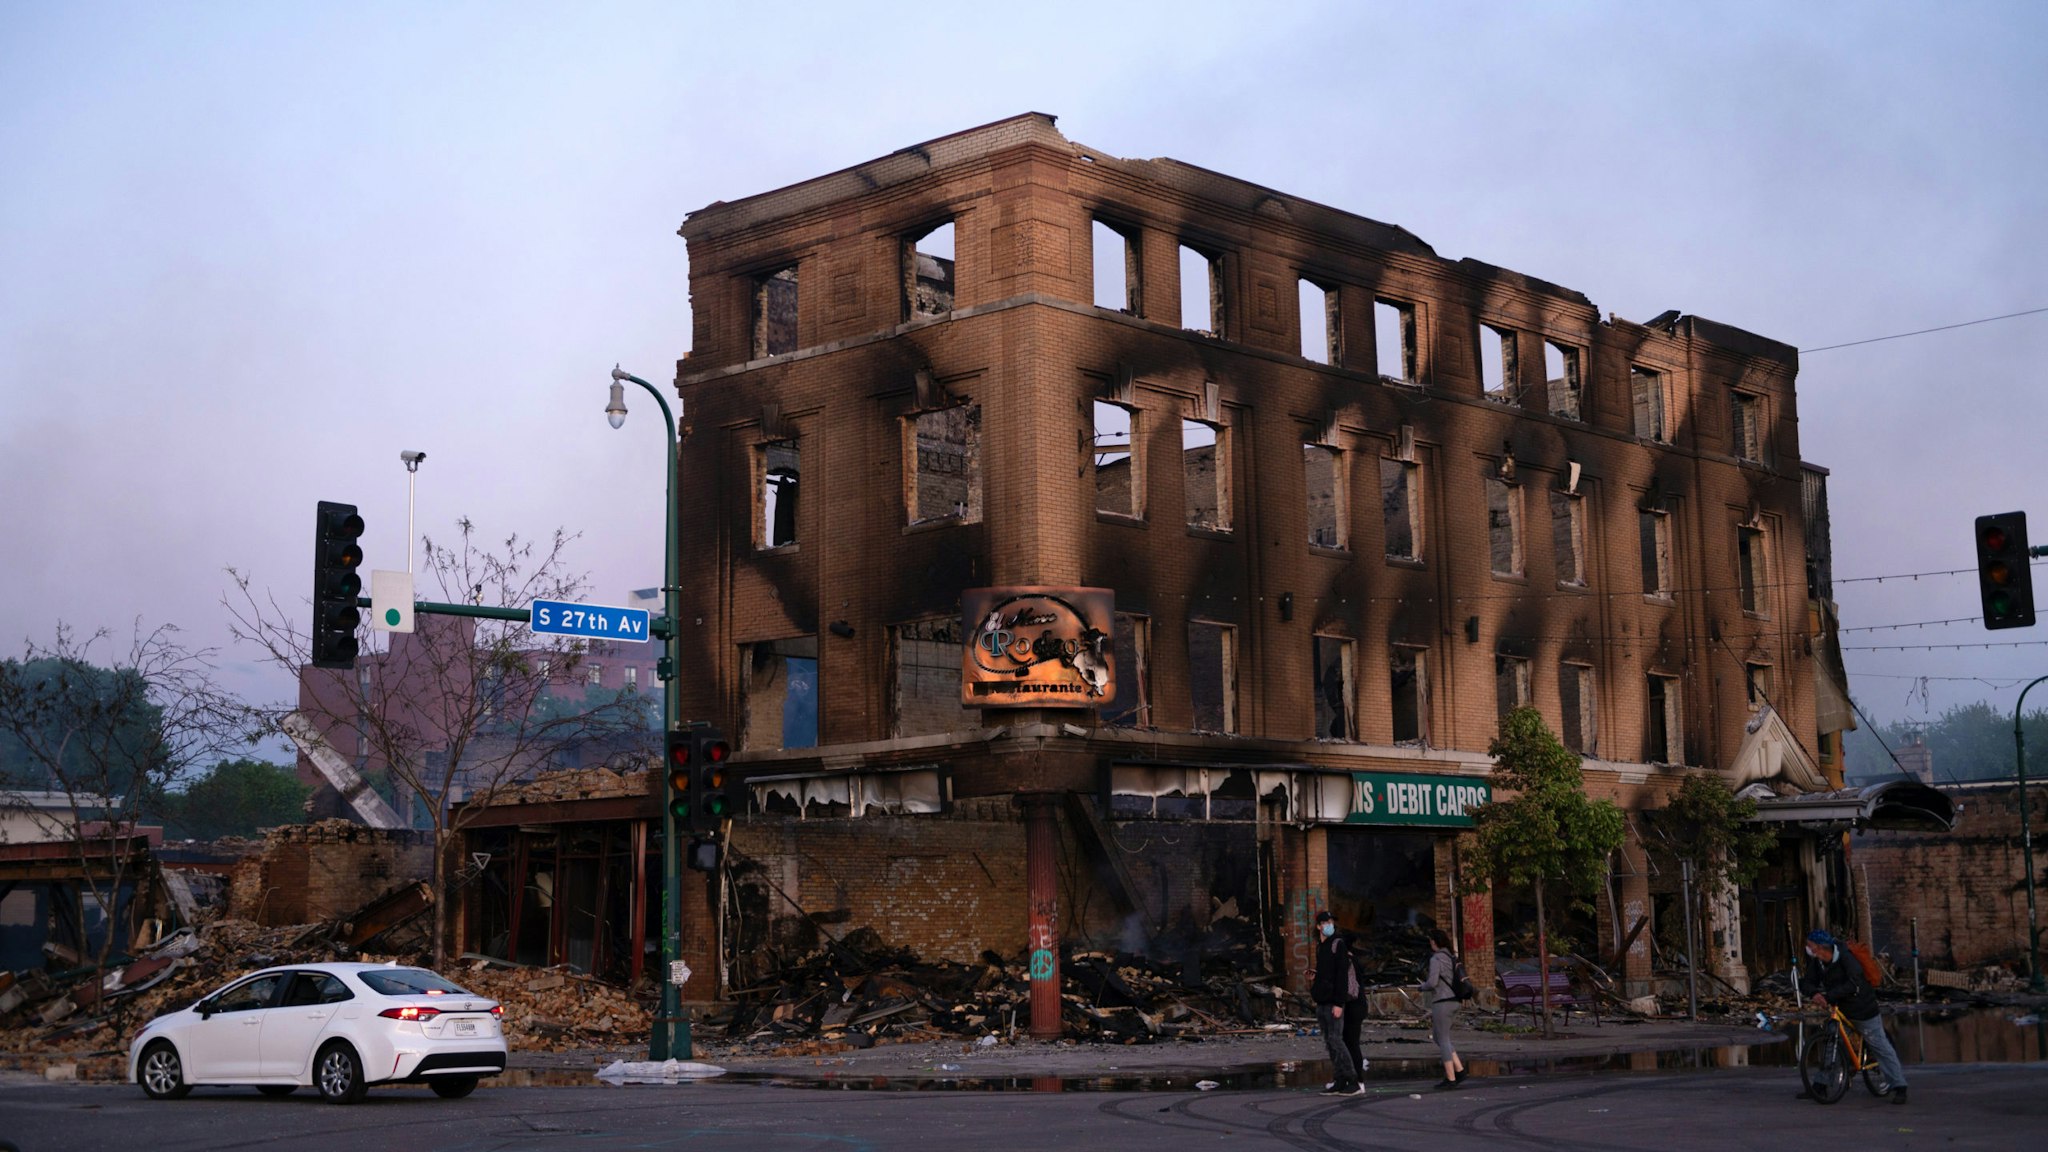 The shell of a building that was burnt during the earlier fires sits still smoldering in Minneapolis, United States, on May 29, 2020. Protests continued following the death of George Floyd, who died after being restrained by Minneapolis police officers on Memorial Day.